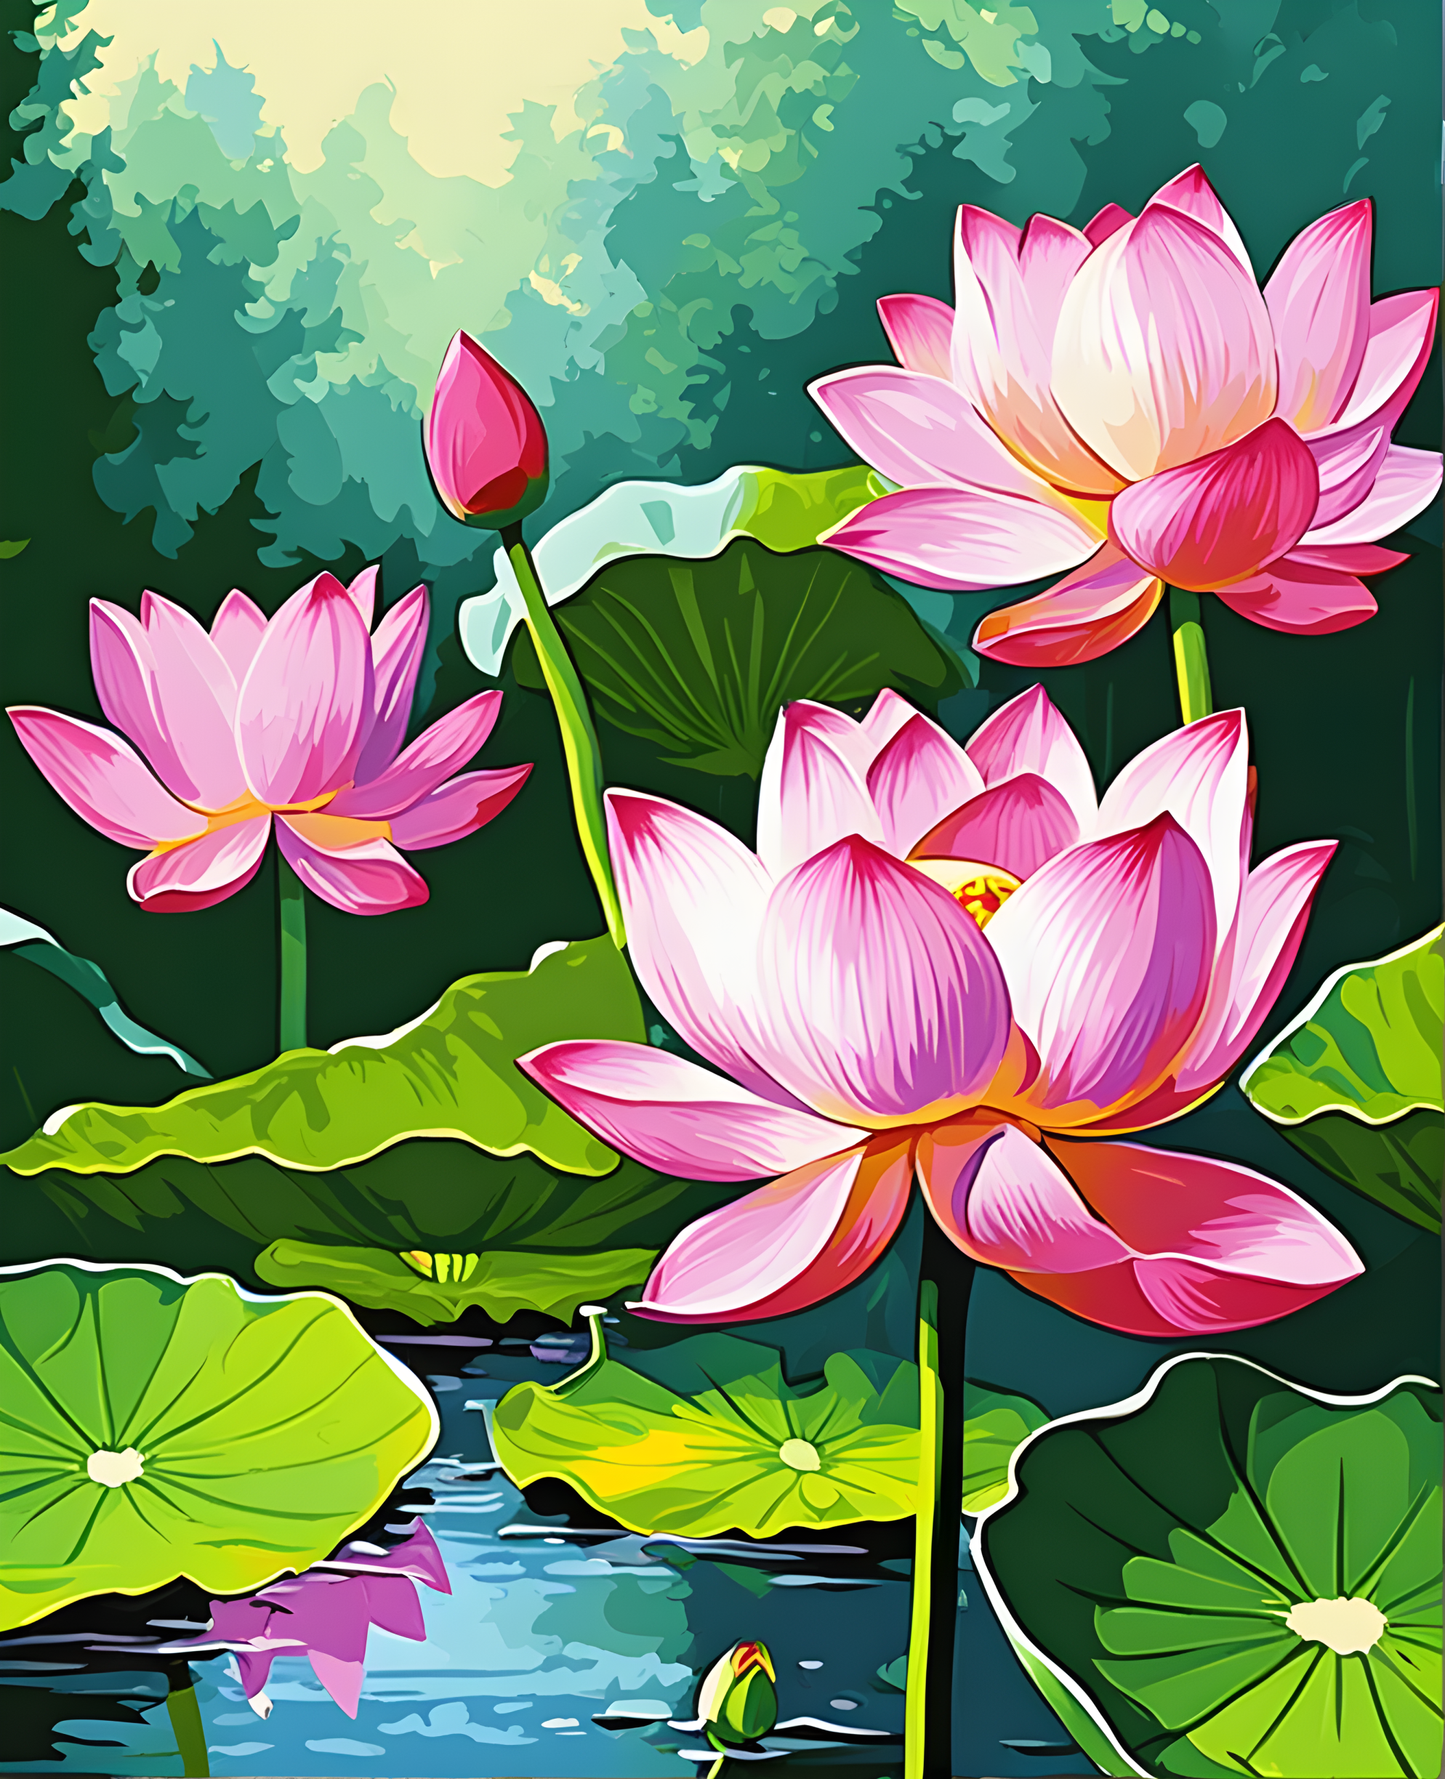 Flowers Collection OD (73) - Lotus - Van-Go Paint-By-Number Kit